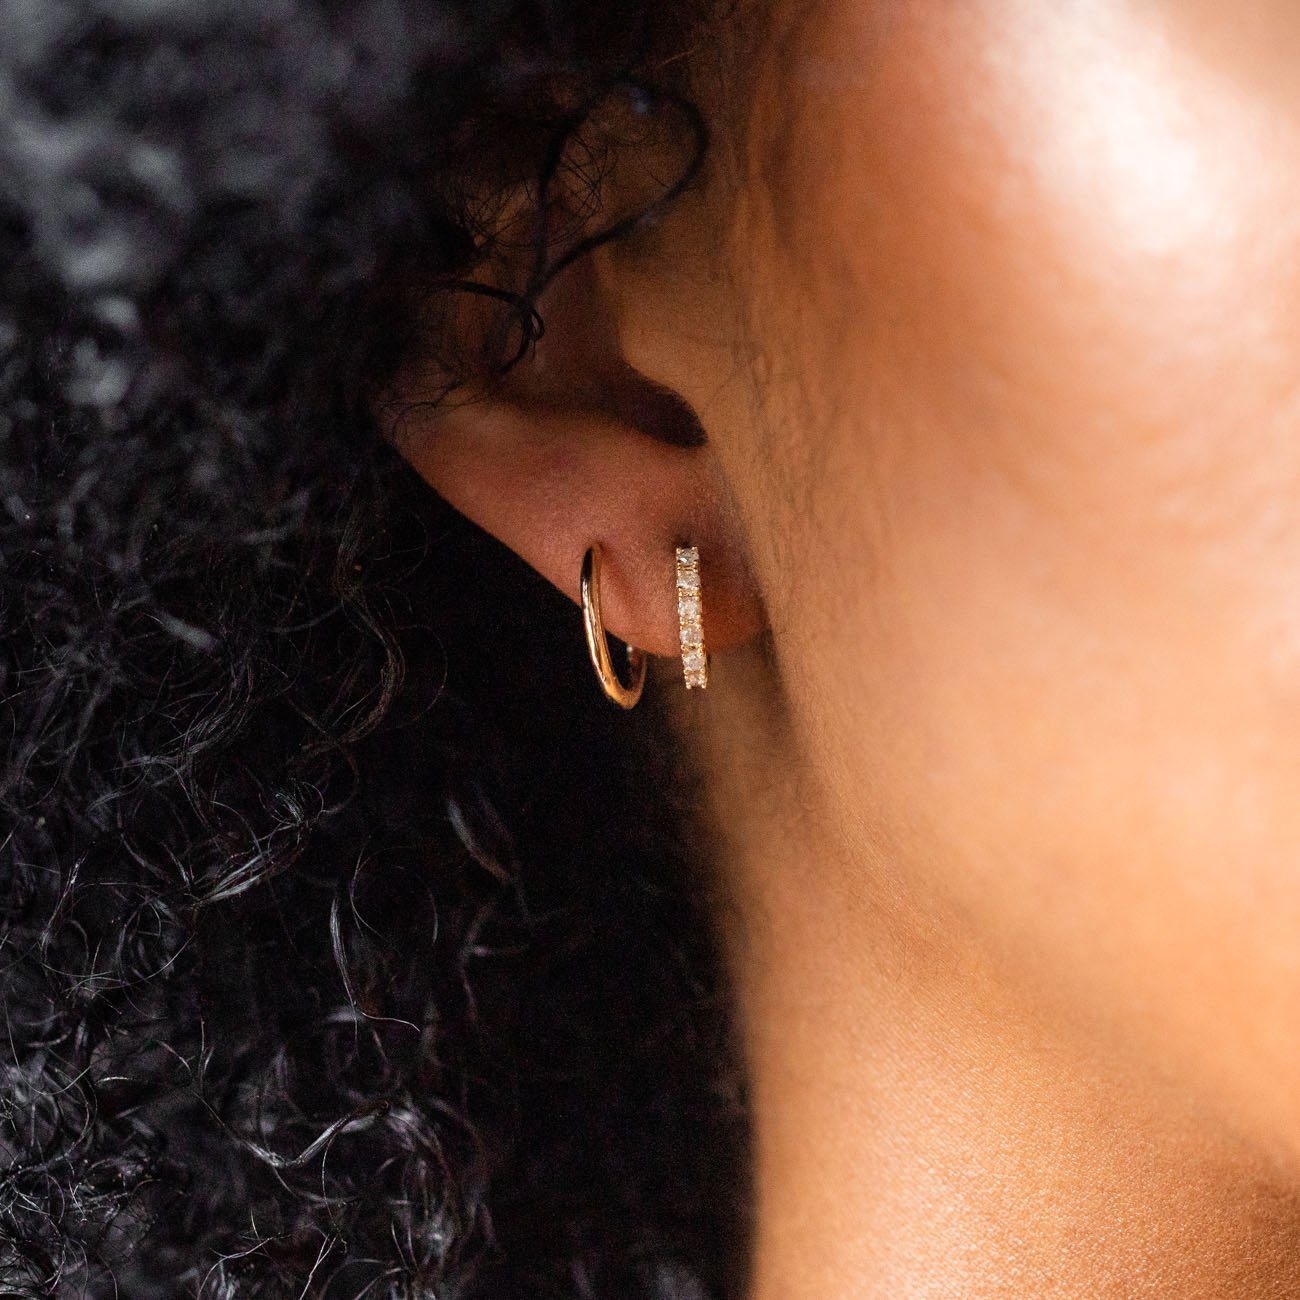 Local Eclectic Diamond and Gold Huggie Hoop Earrings on Ear